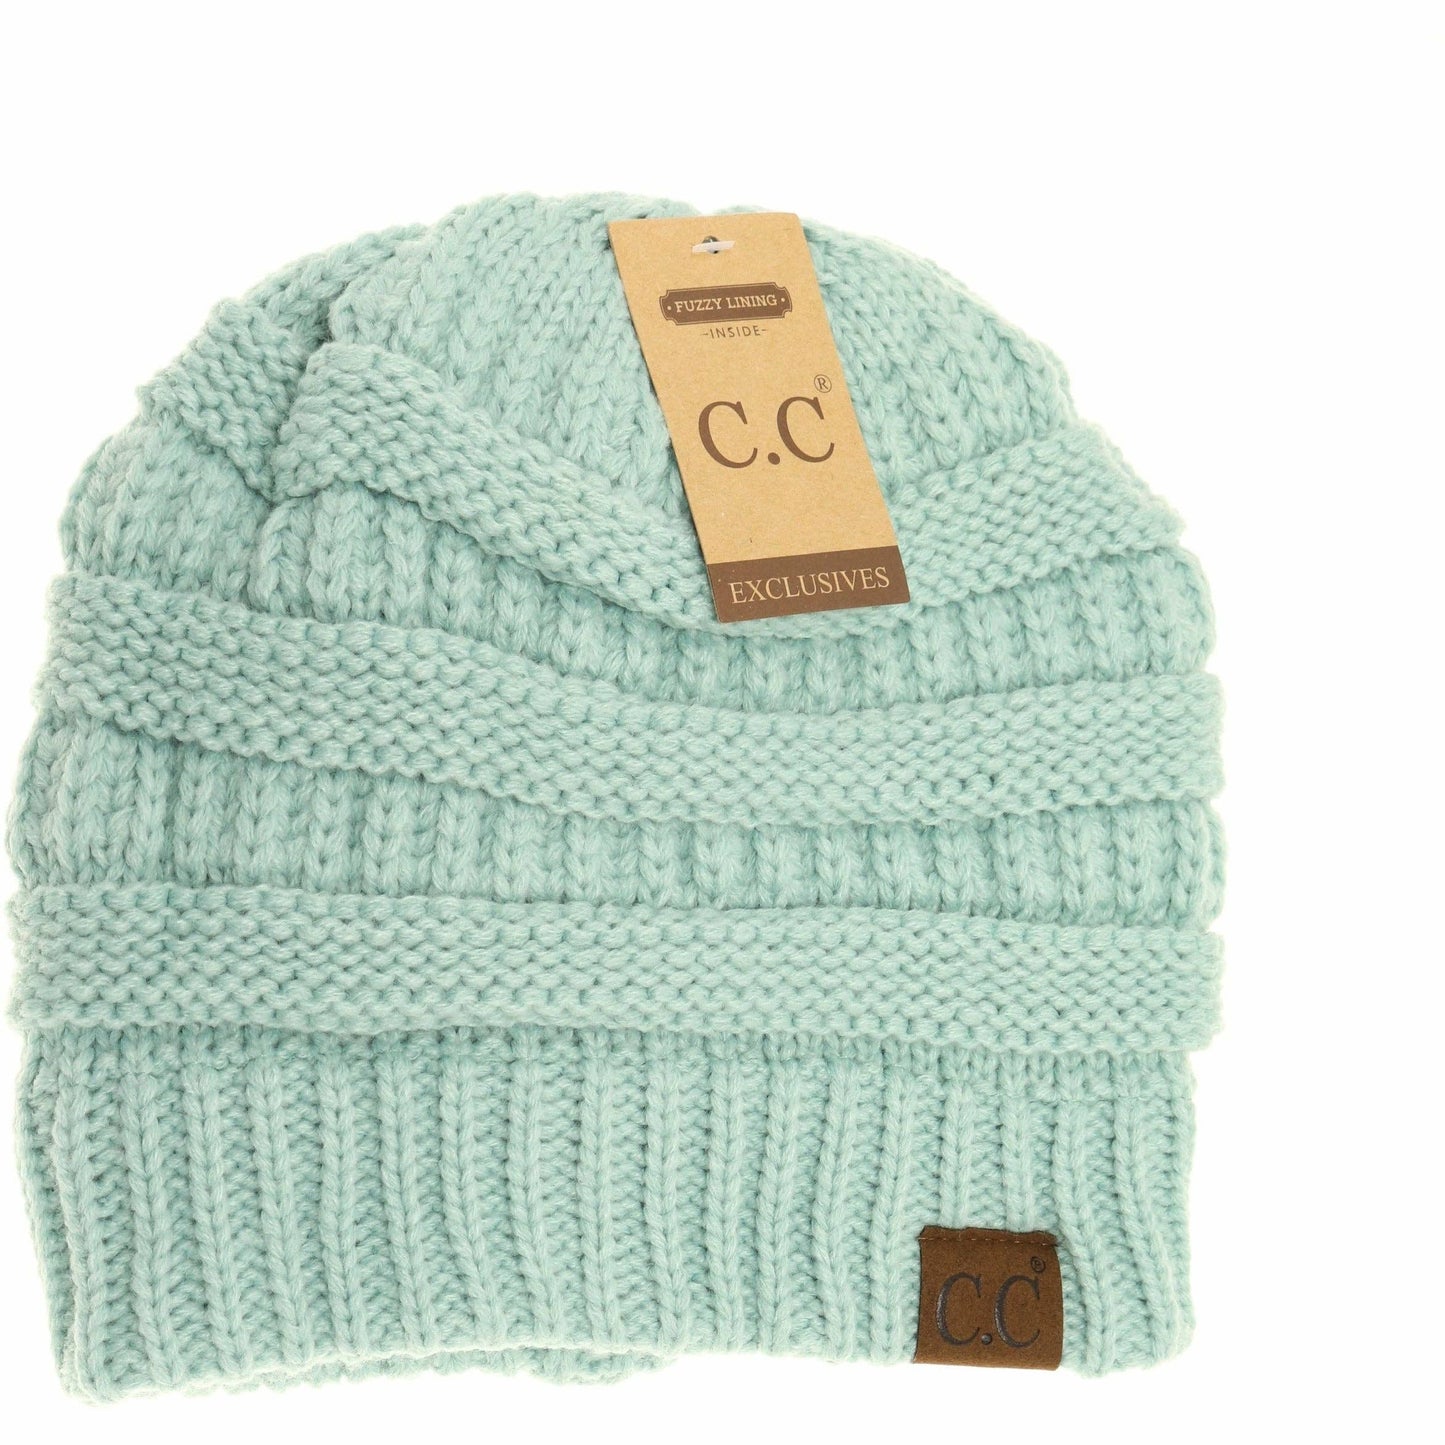 Classic Fuzzy Lined CC Beanie HAT25: Earth Grey